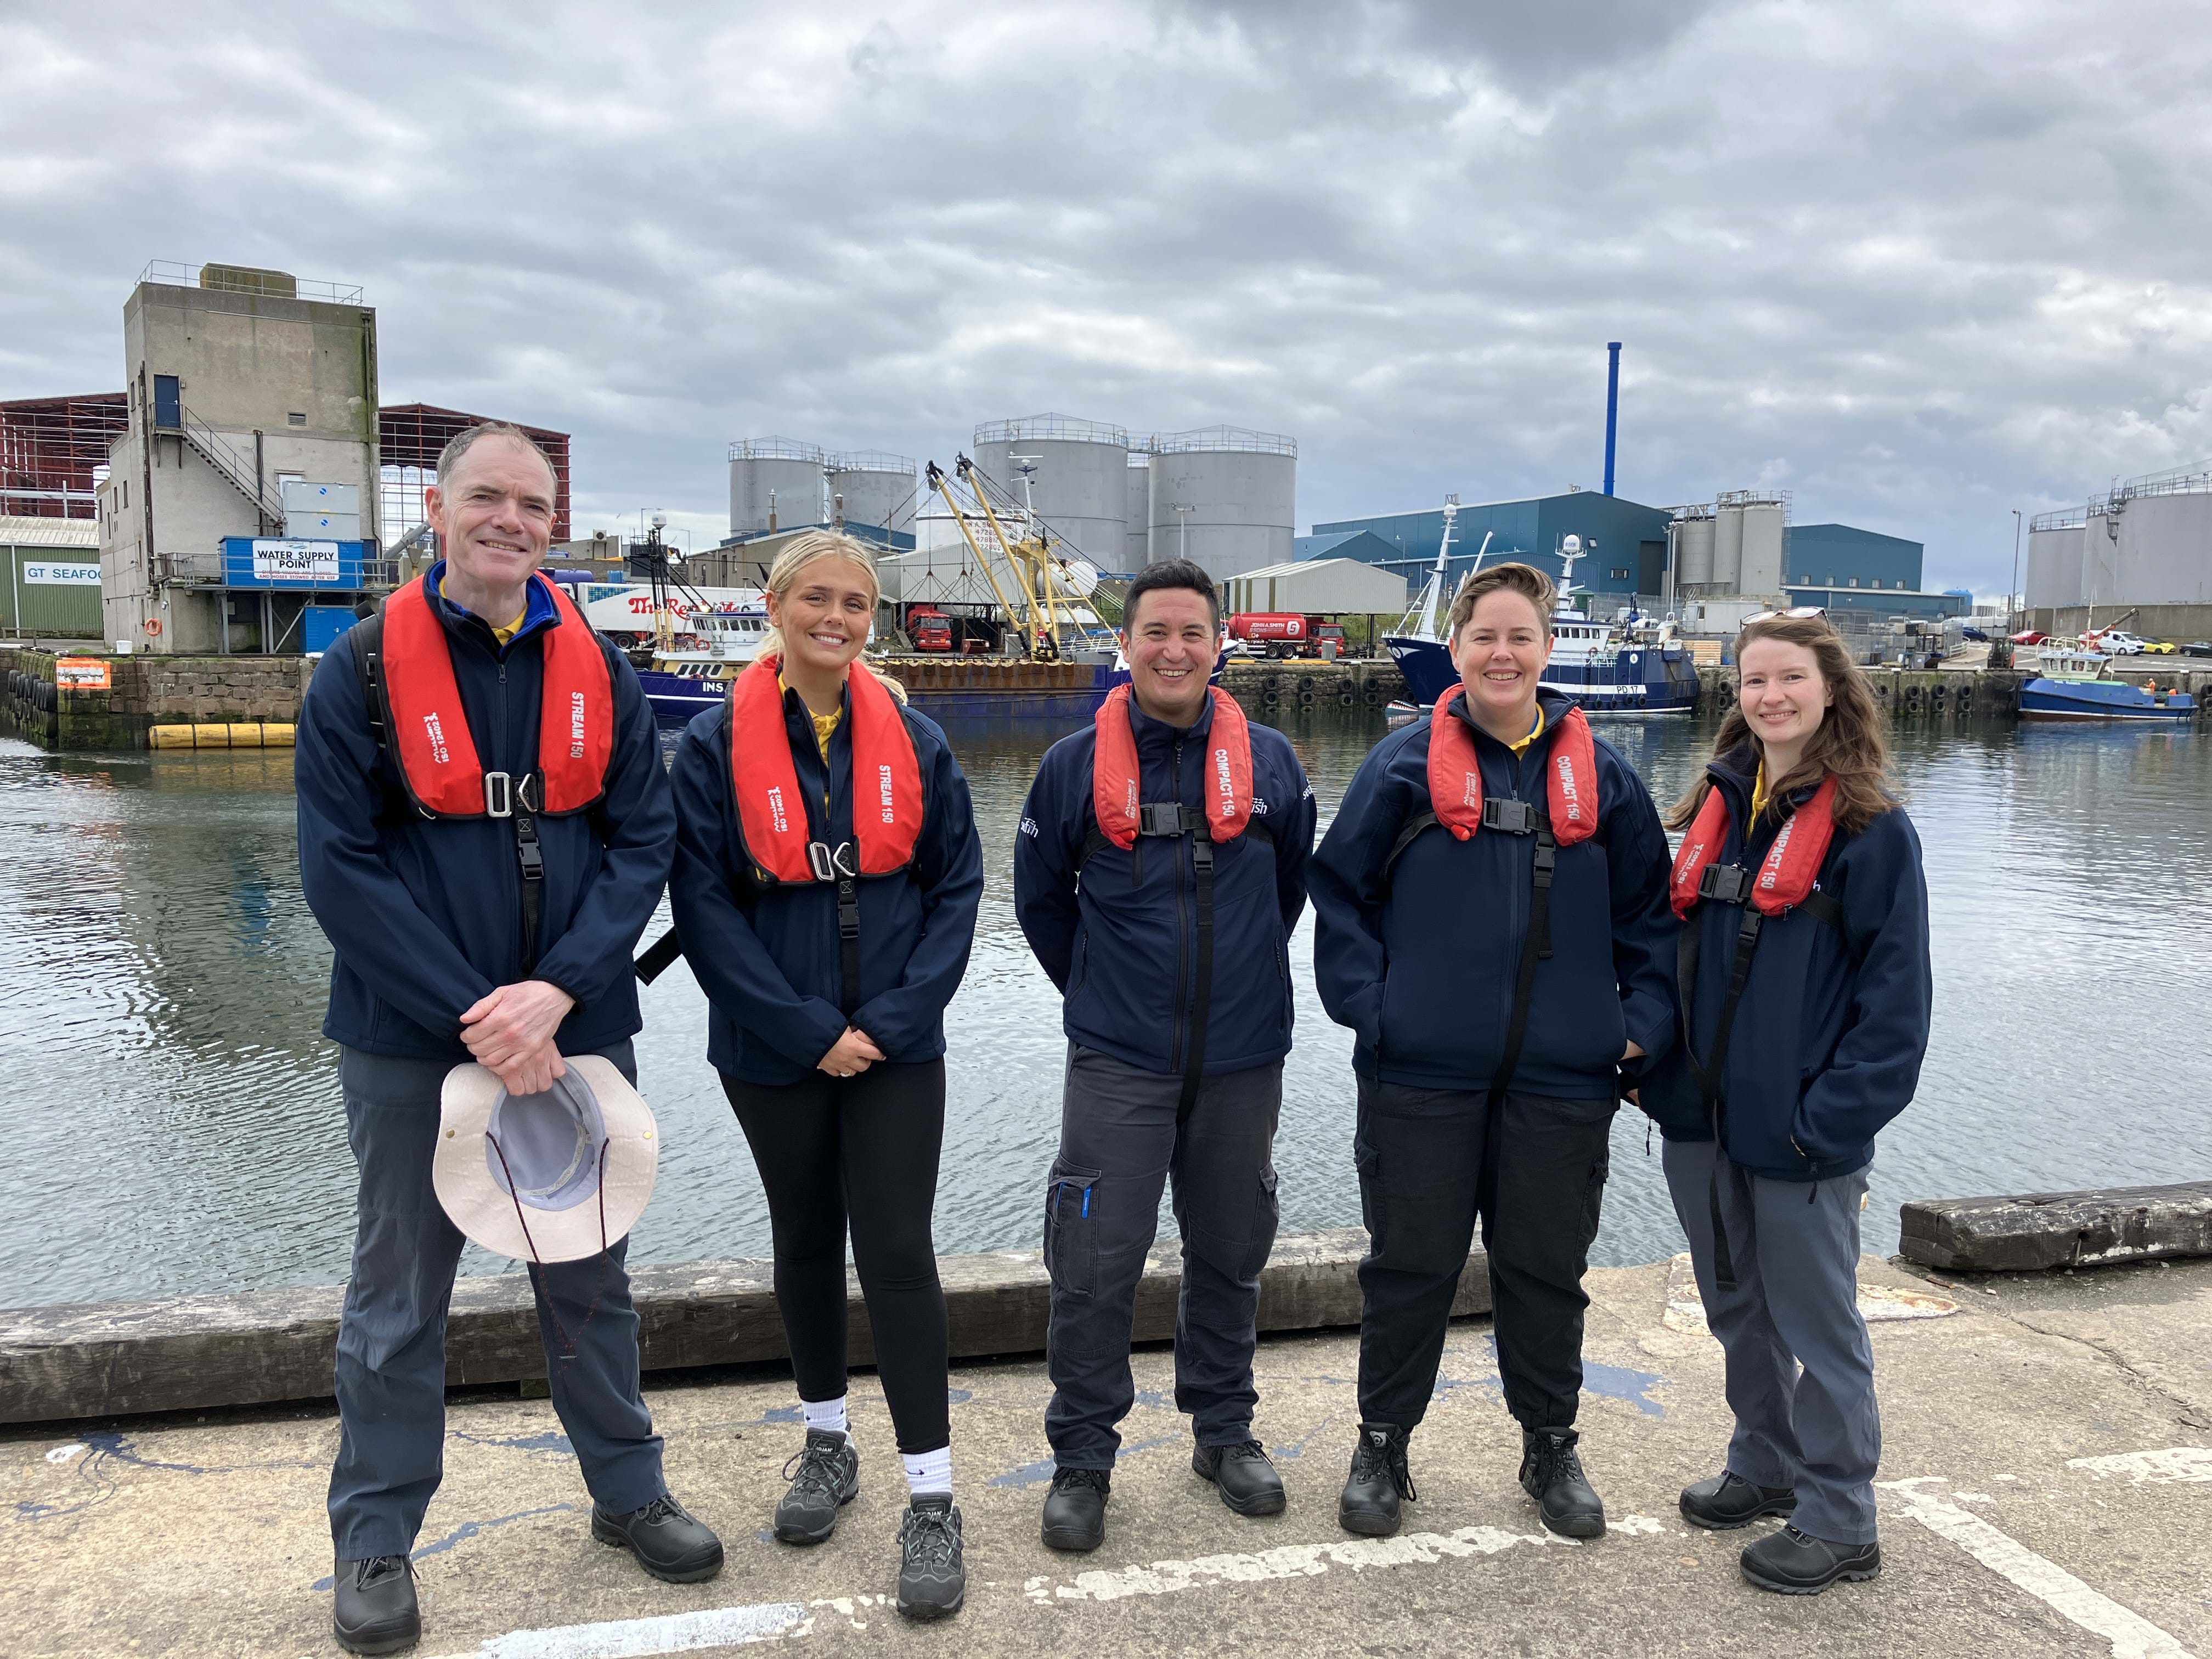 Our fleet survey team stand dockside at a harbour.